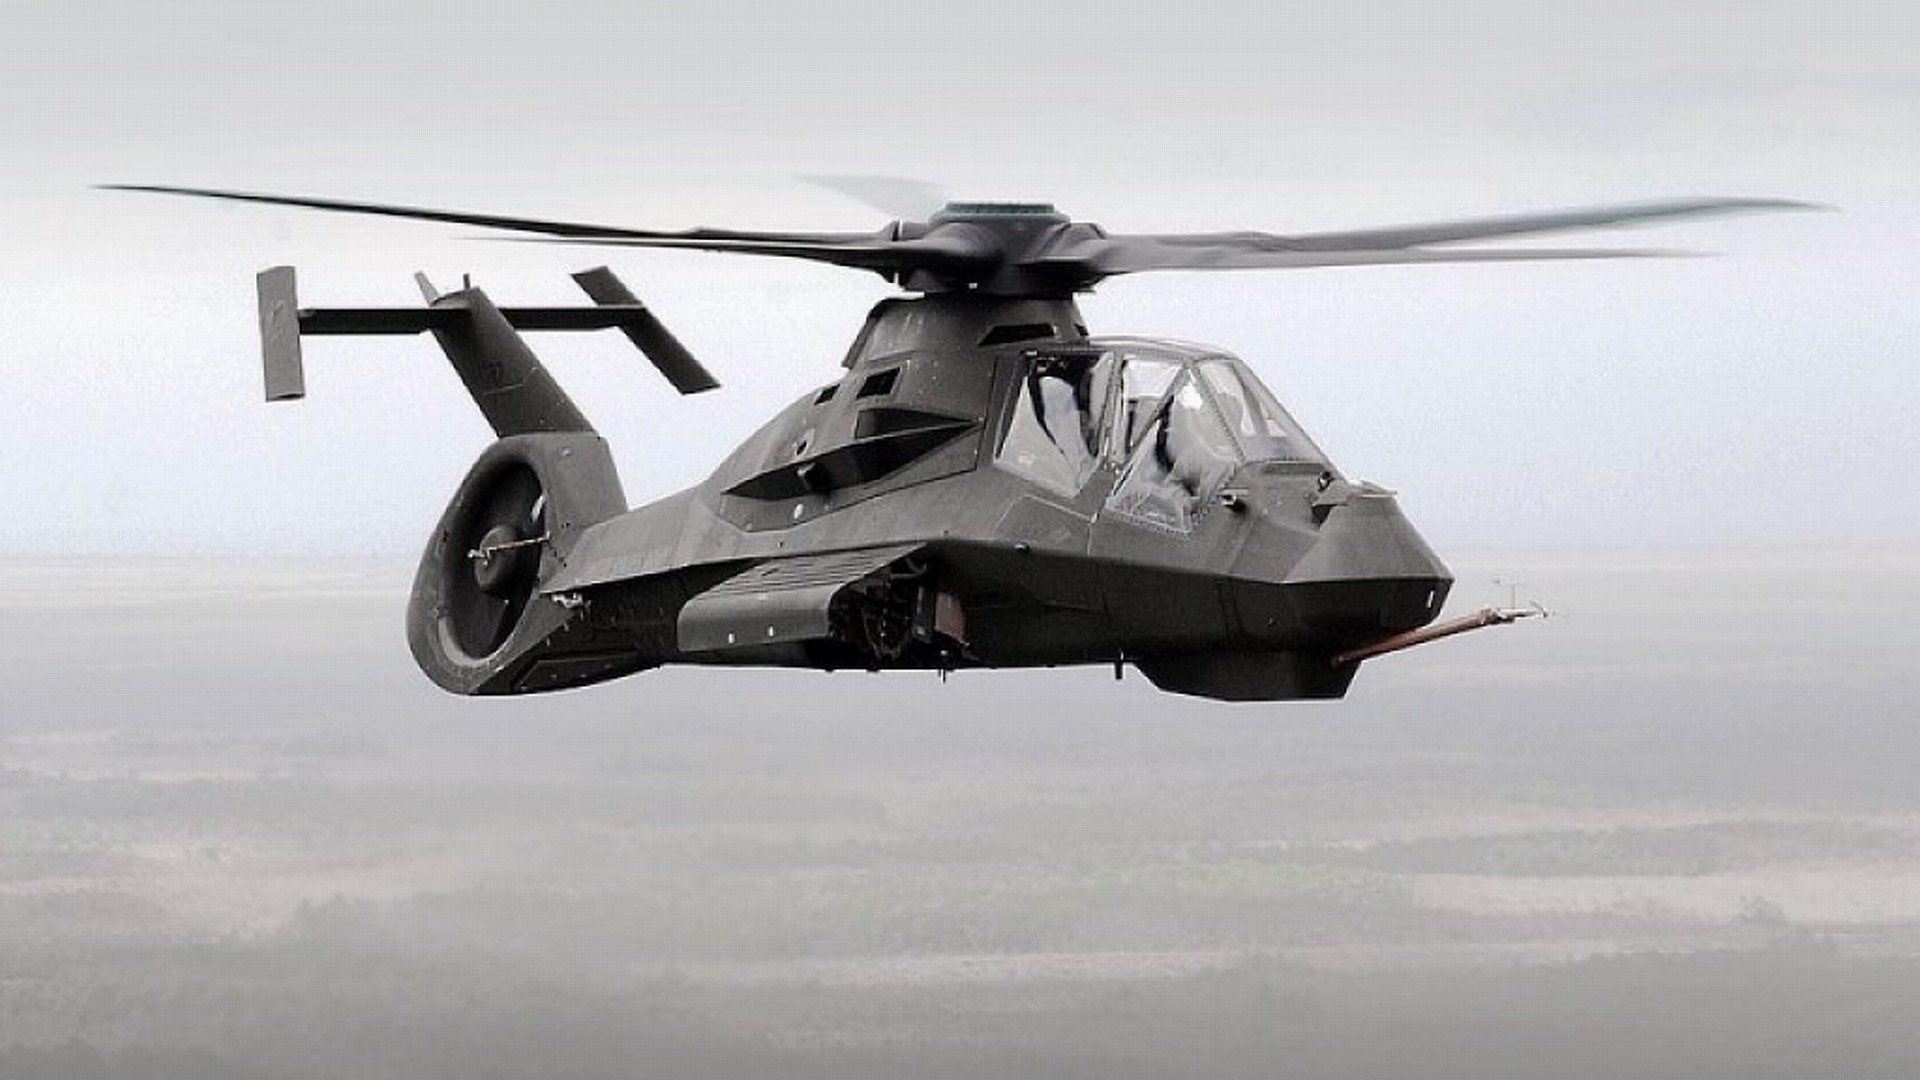 1920x1080 Military - Boeing-Sikorsky RAH-66 Comanche Wallpaper